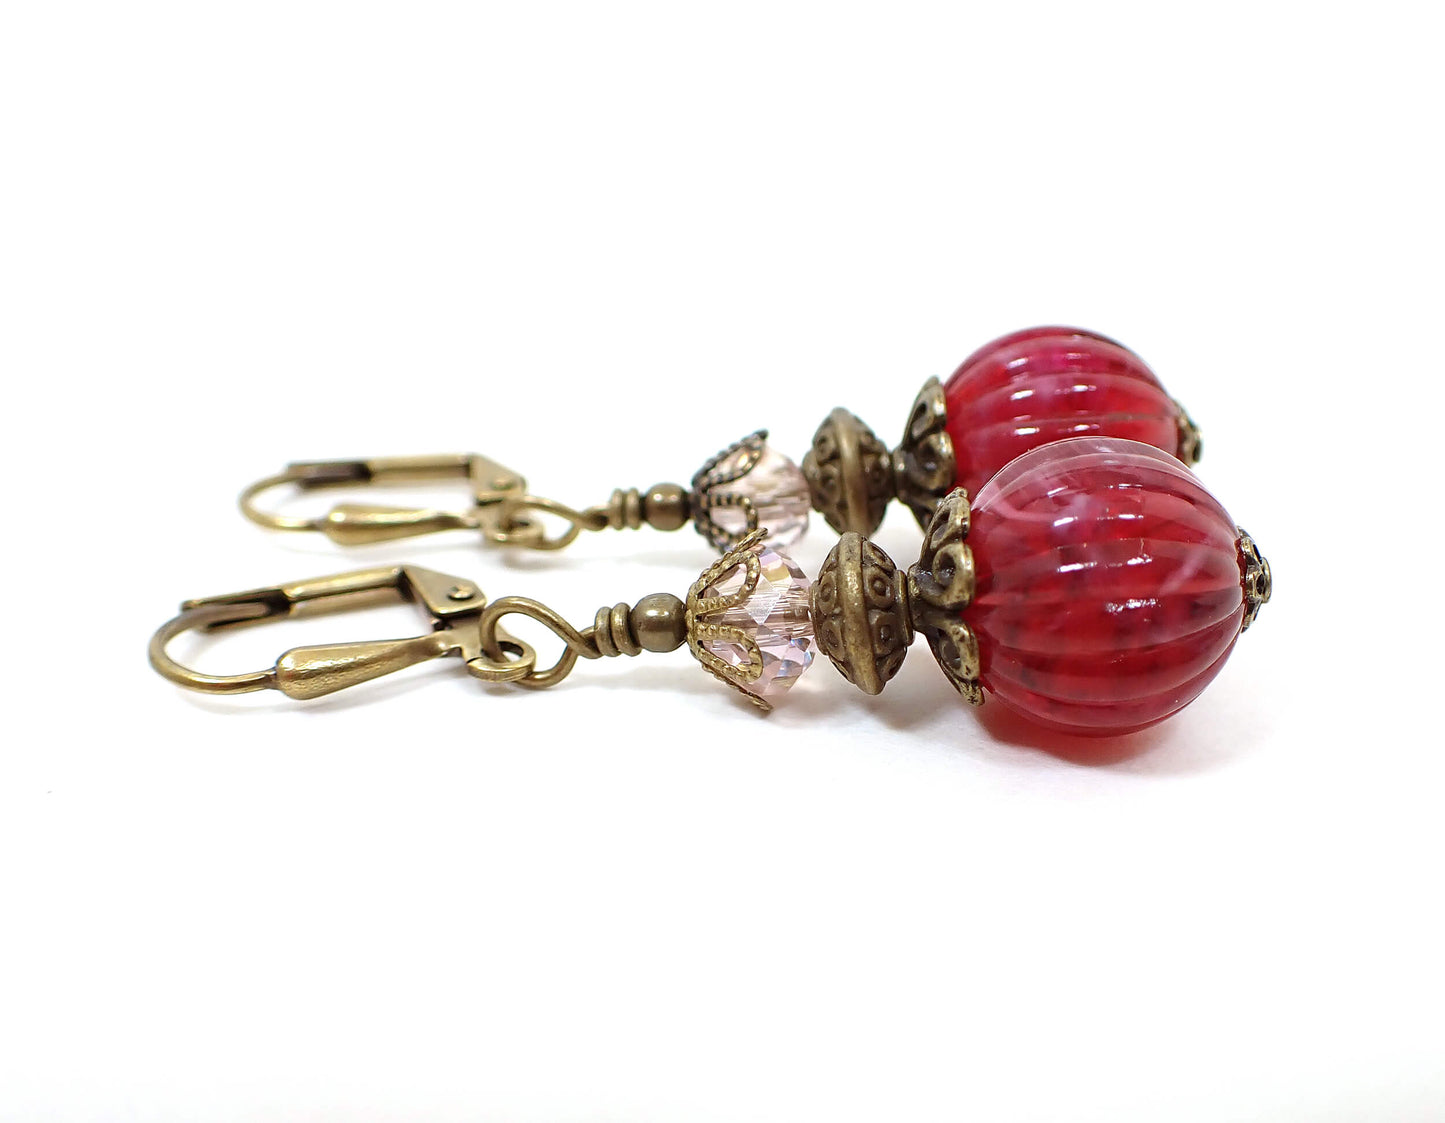 Antiqued Brass Raspberry Lucite Handmade Drop Earrings Hook Lever Back or Clip On